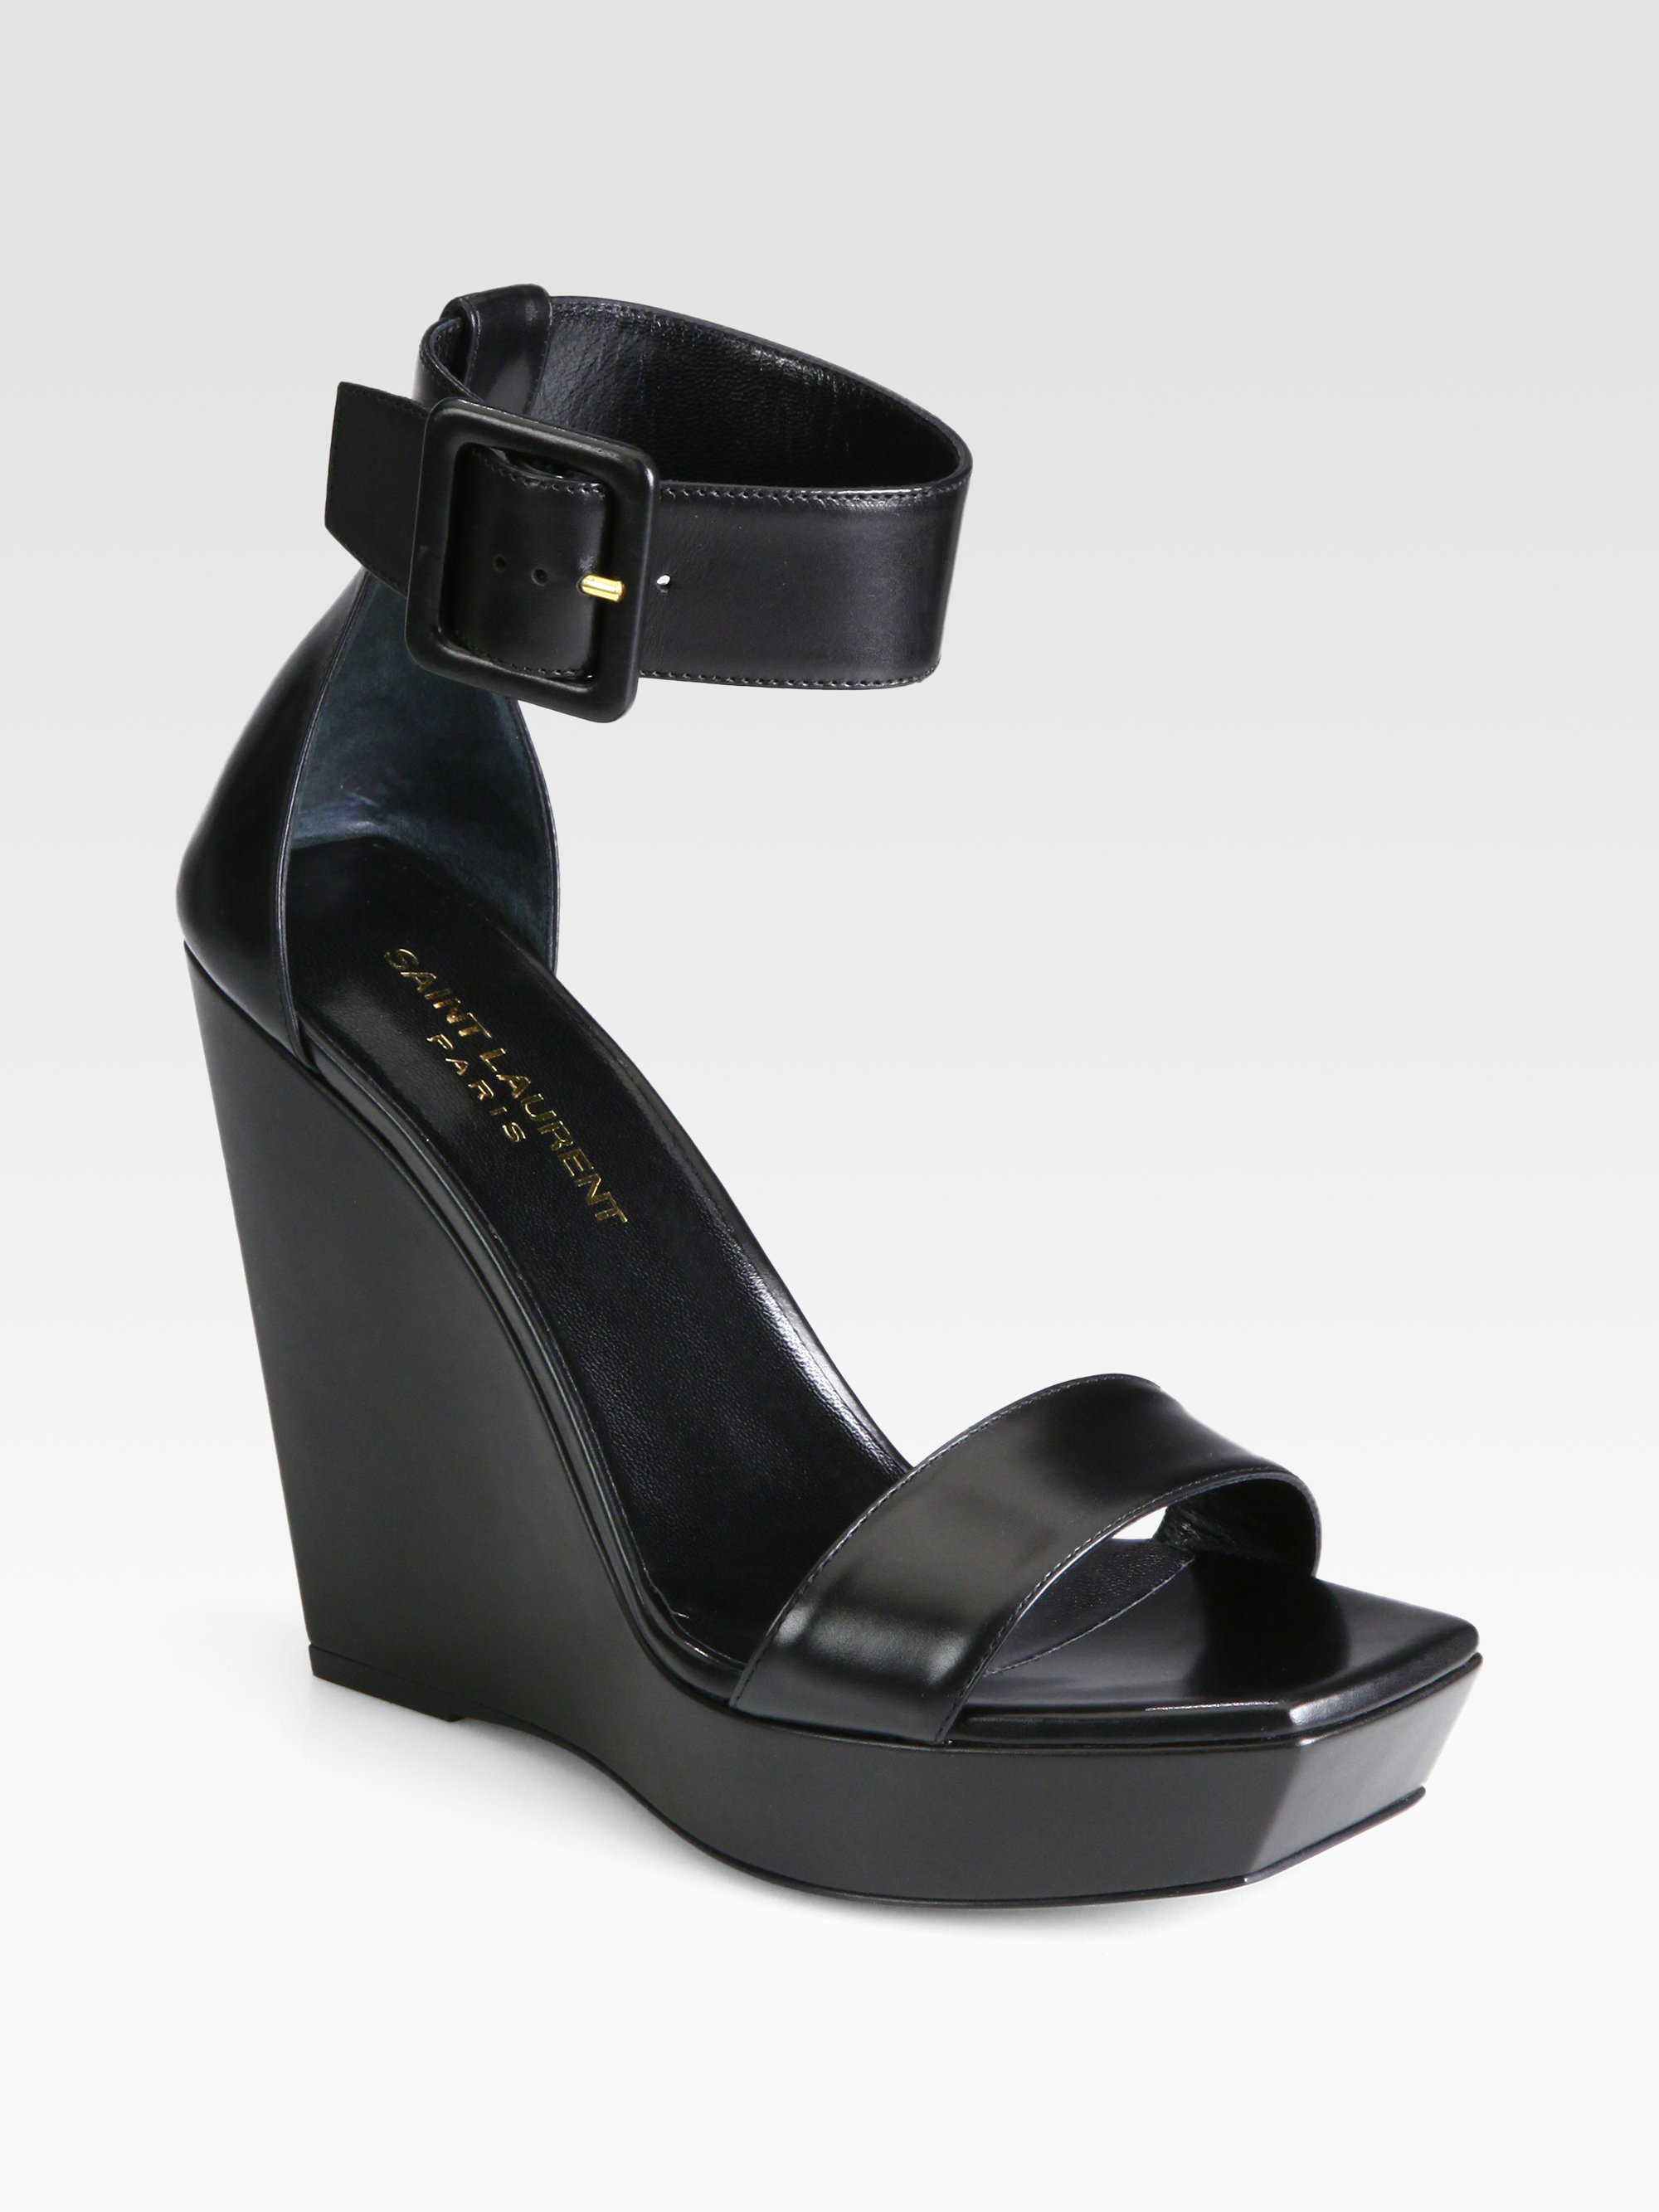 Saint Laurent Leather Ankle Strap  Wedge  Sandals  in Black Lyst